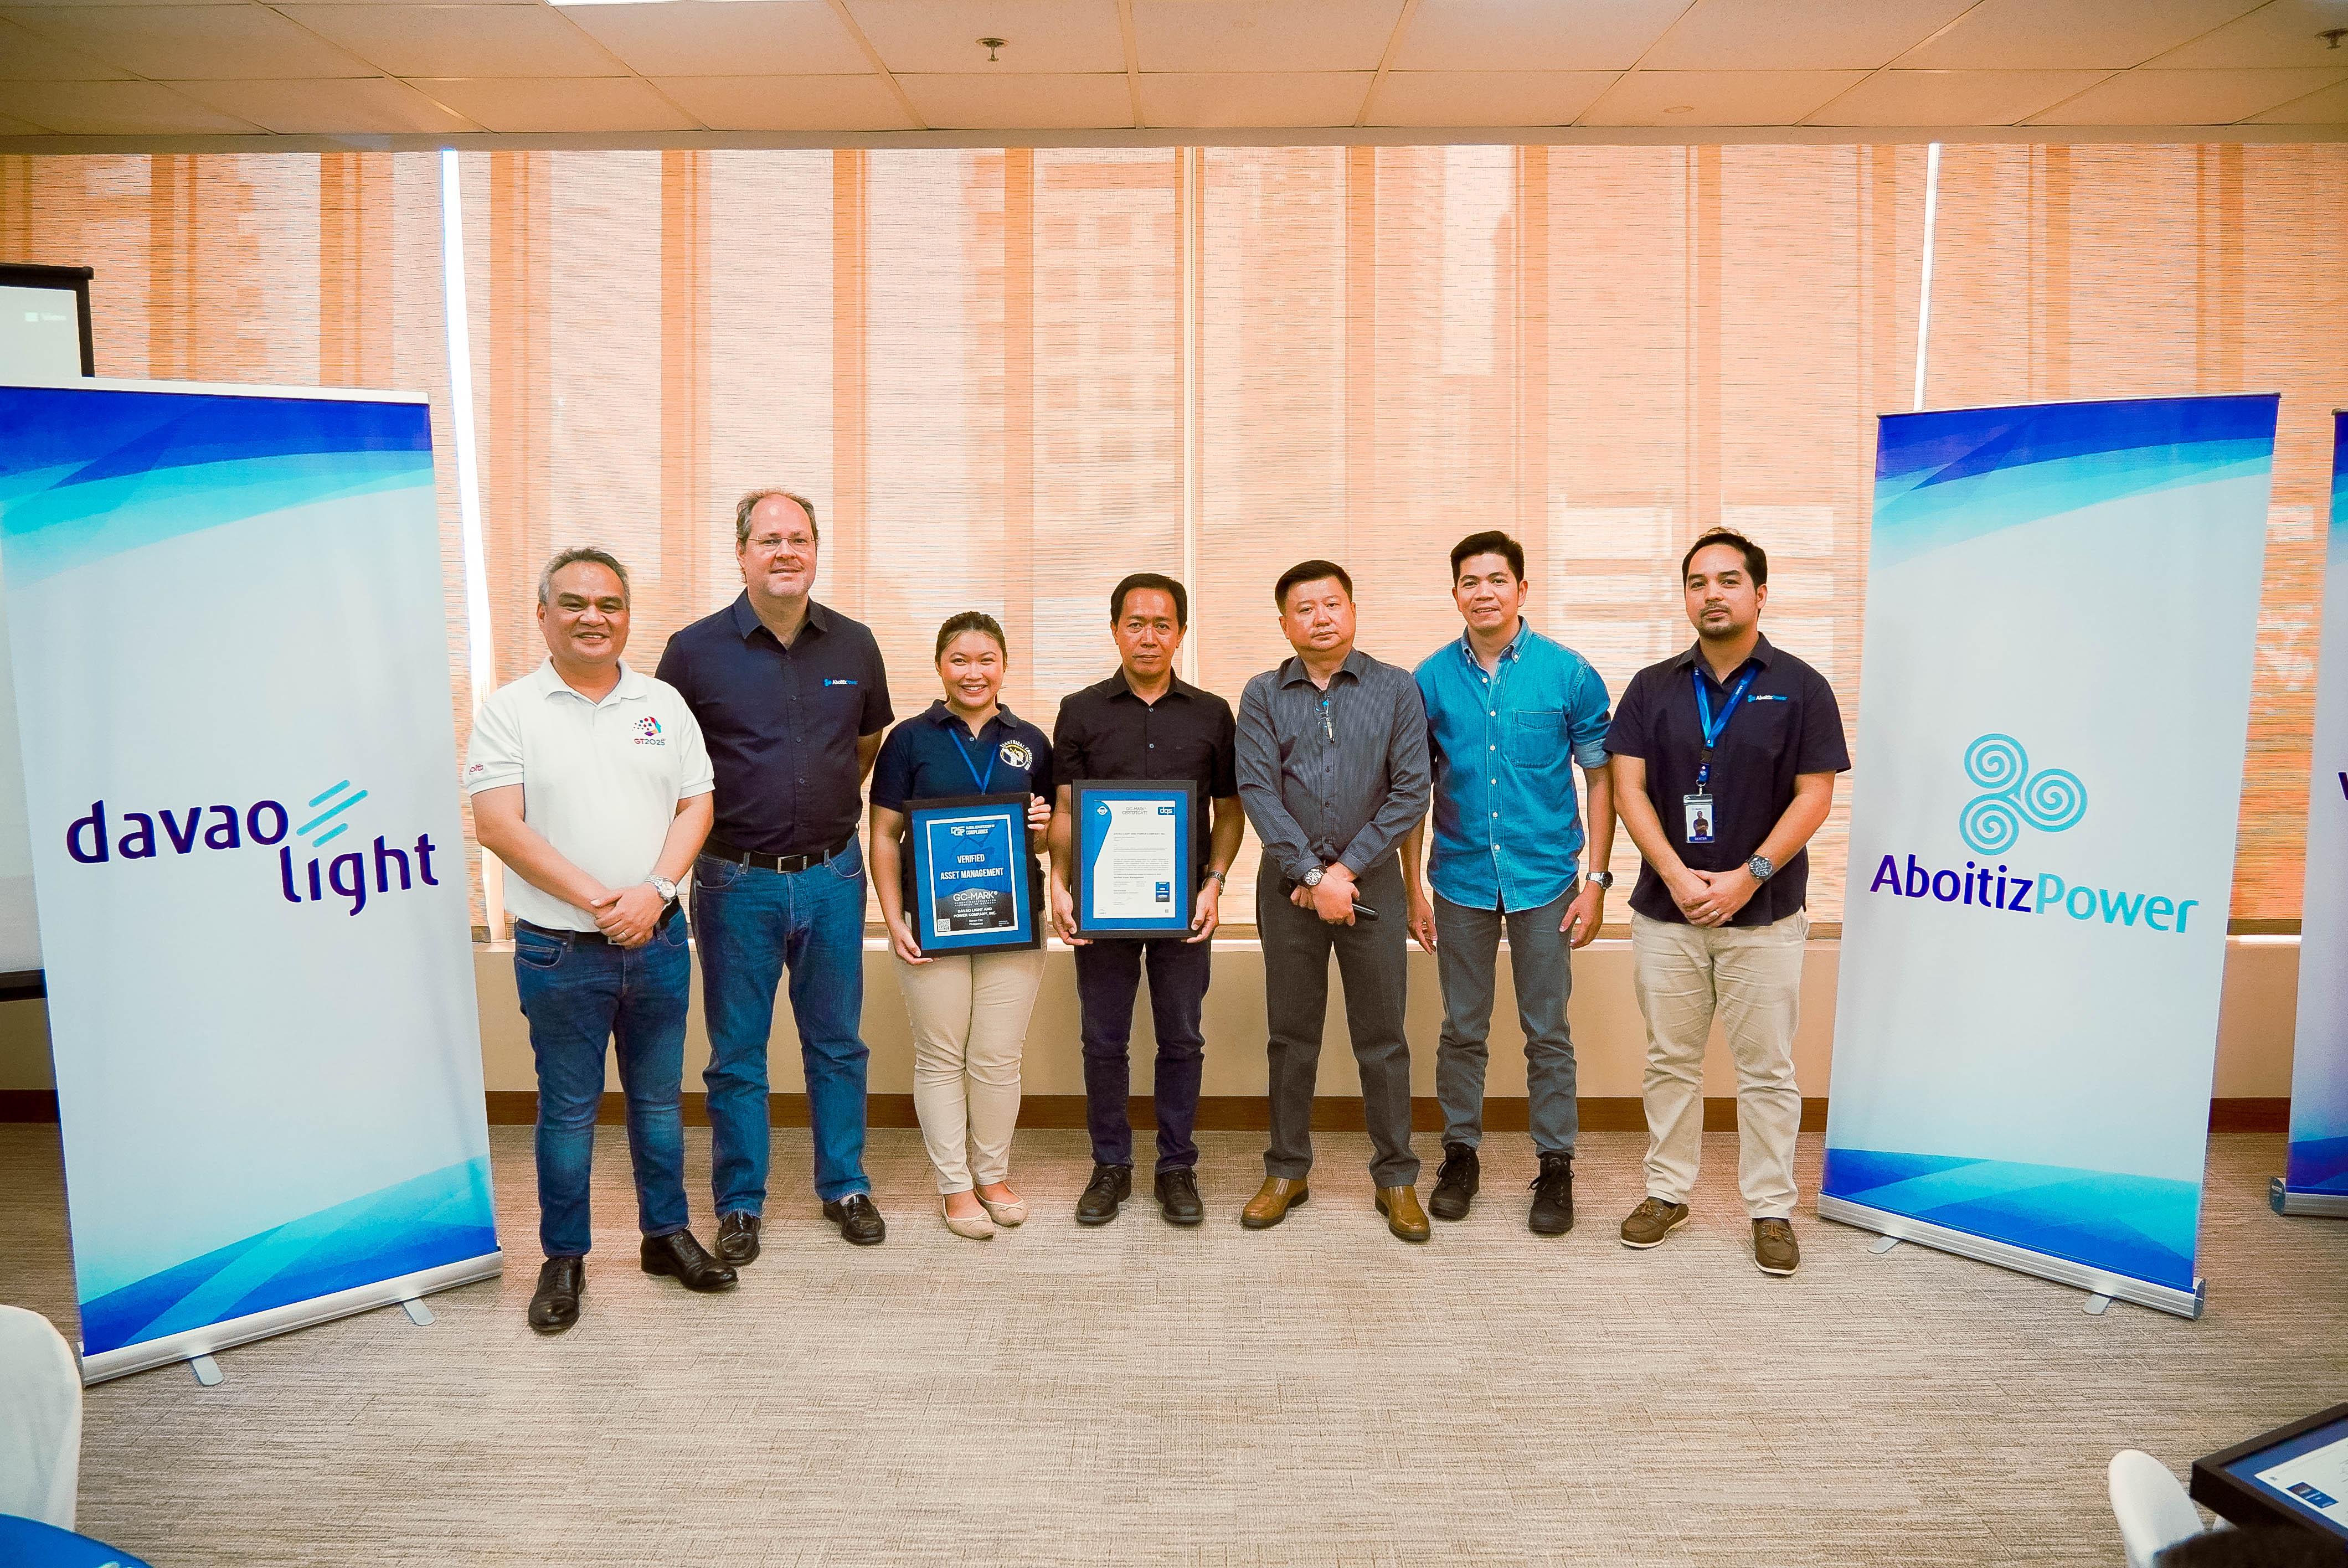 Davao Light among the first Philippine-based electric distribution utilities to receive ISO 55002:2014 certification